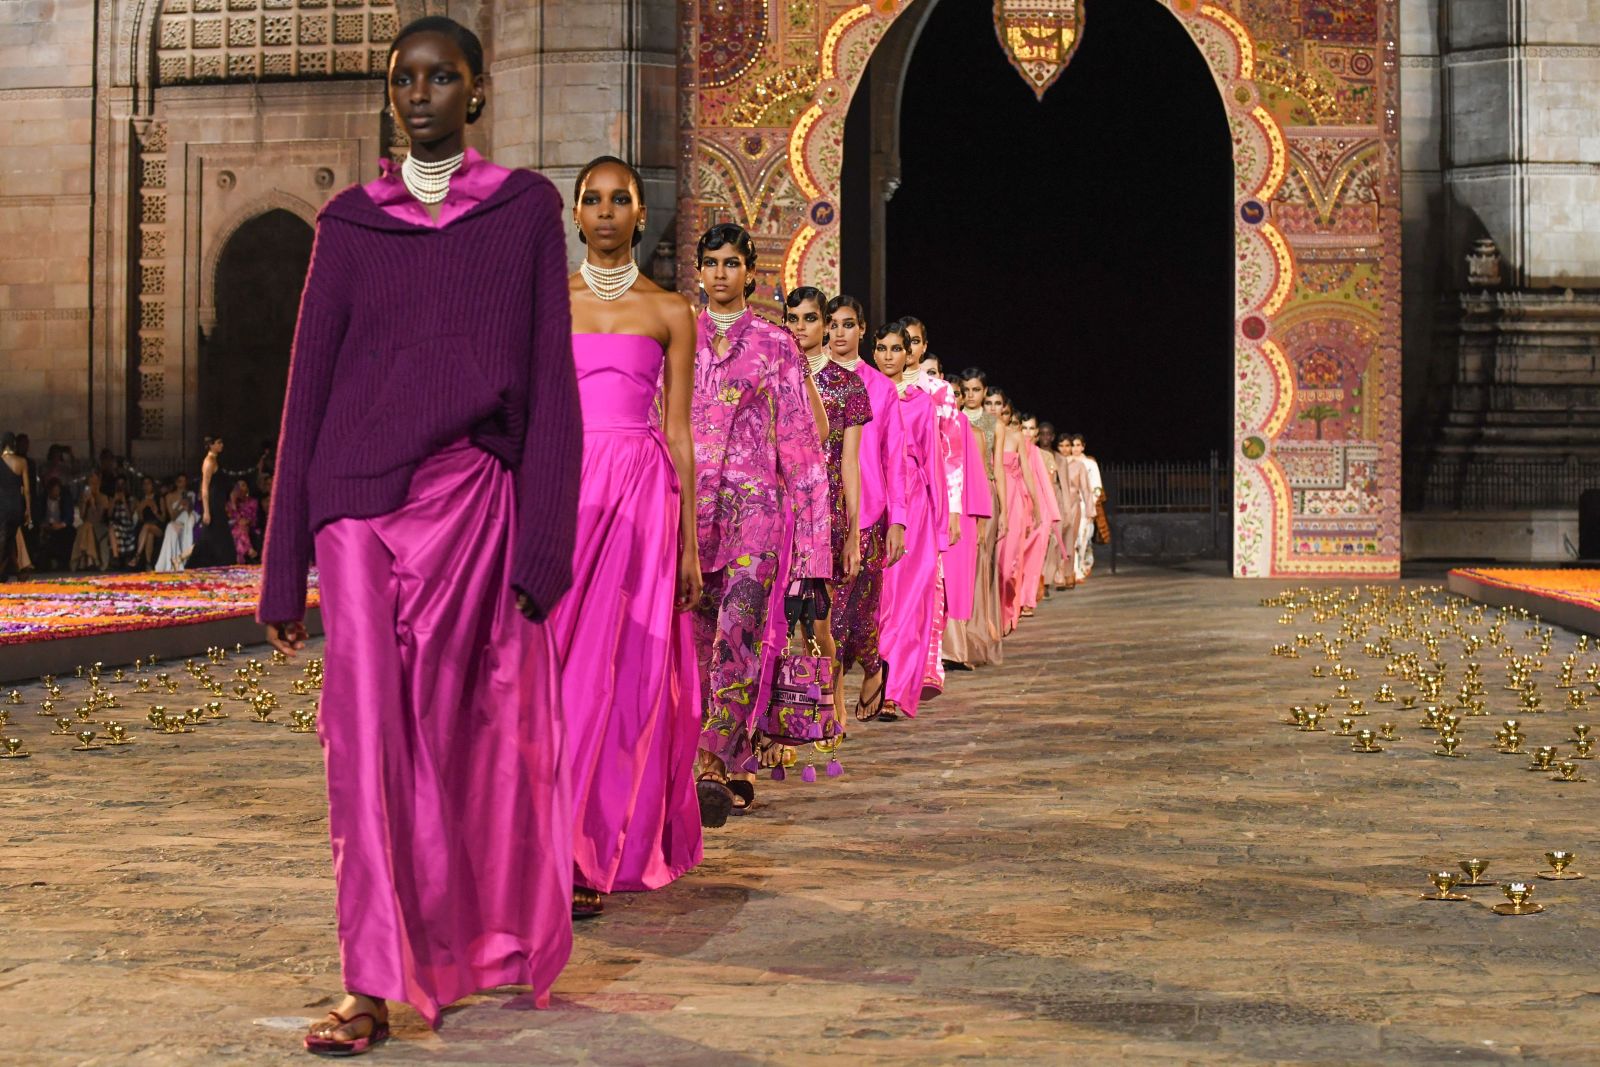 The Indian artisans behind Paris Couture. Recognition at last?